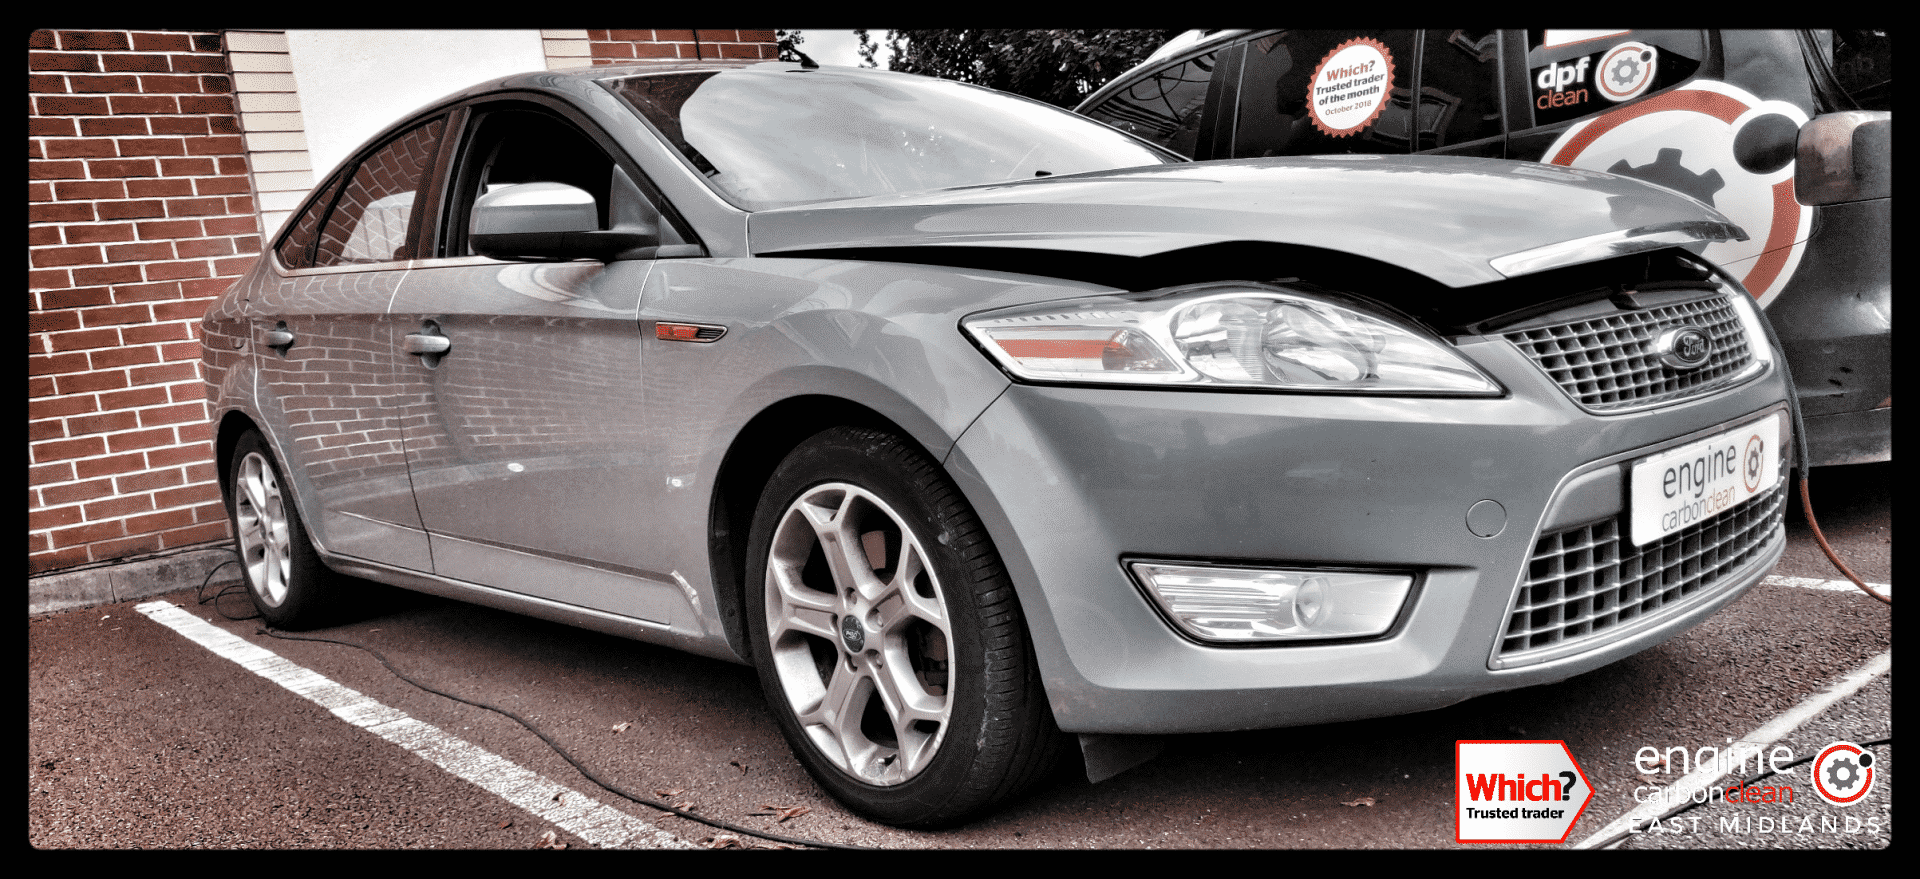 DPF issues: thermostat and pressure sensor on a Ford Mondeo 2.0 (2010 - 130,375 miles)